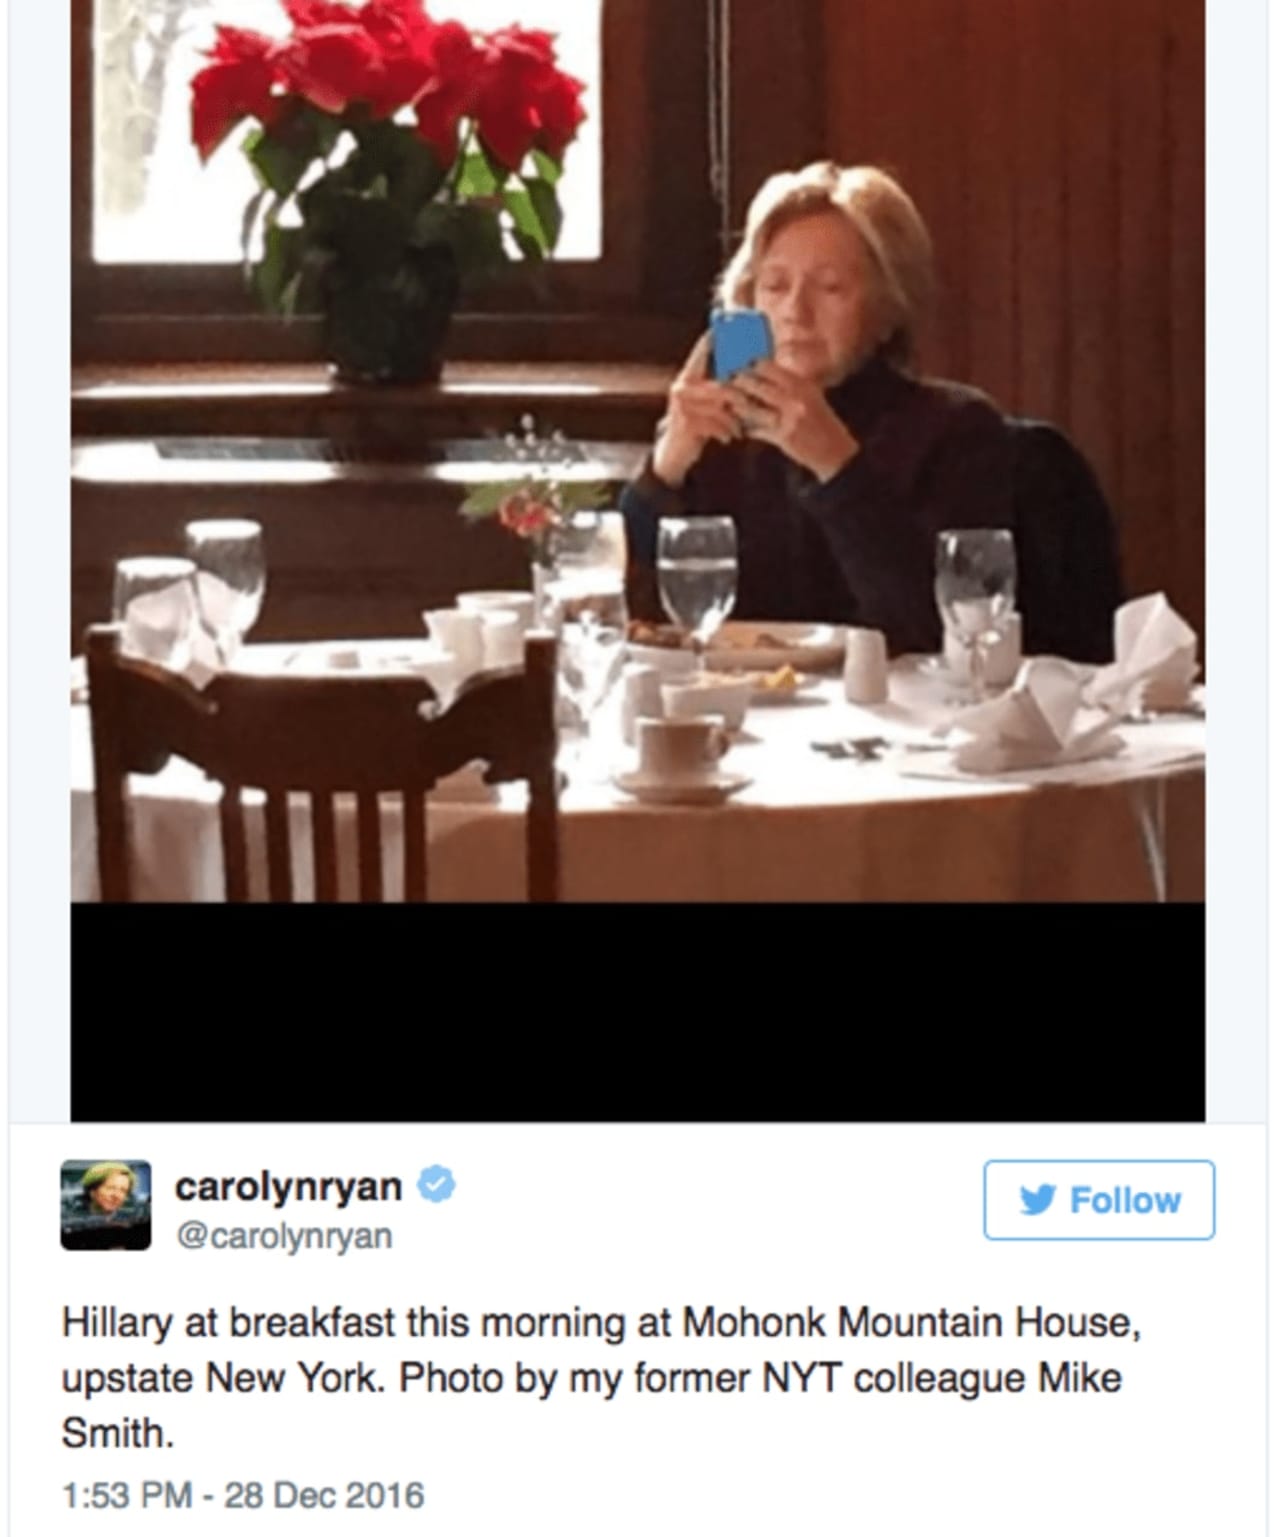 Chappaqua's Hillary Clinton was snapped having breakfast and checking her cell phone at the Mohonk Mountain House in New Paltz Wednesday. This image was tweeted by Carolyn Ryan, a New York Times editor.